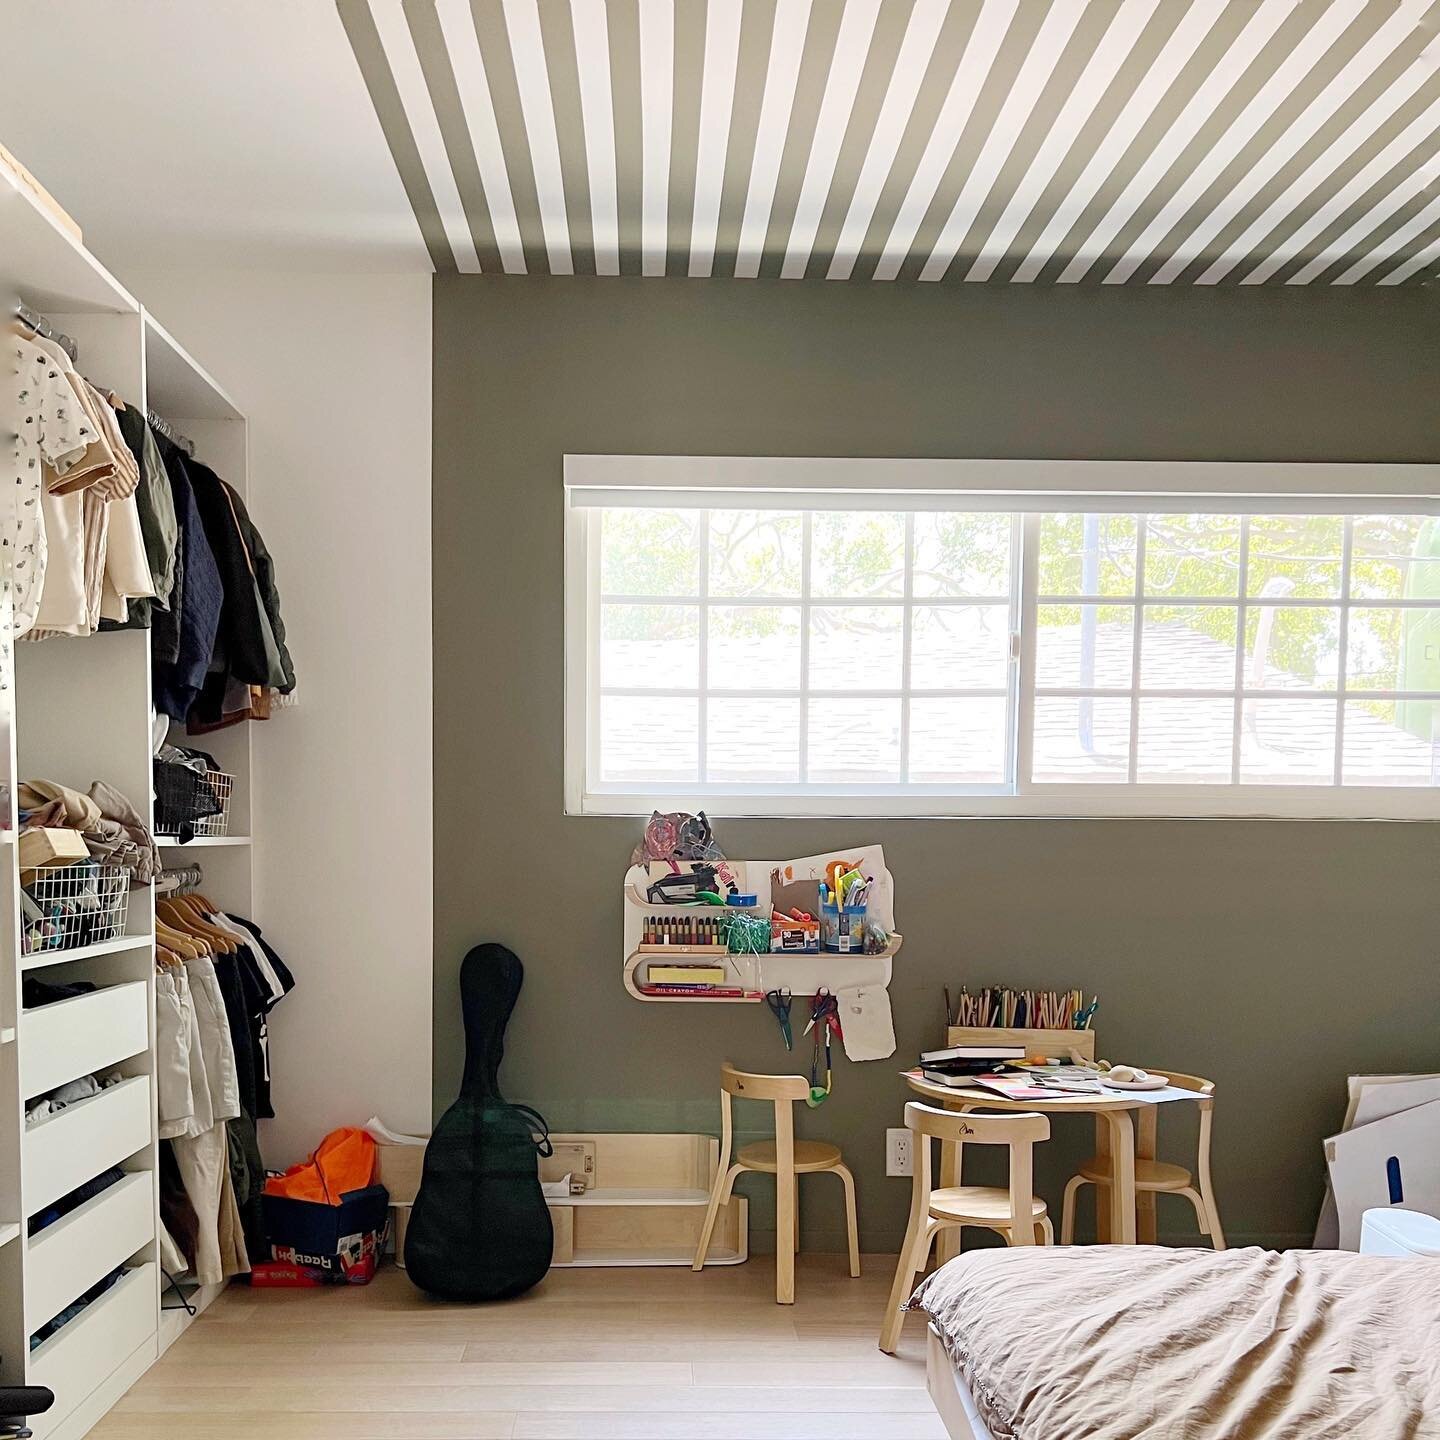 Can we take a second and appreciate that ceiling detail work? We love a fun yet tasteful design for kids&rsquo; rooms such as this one.